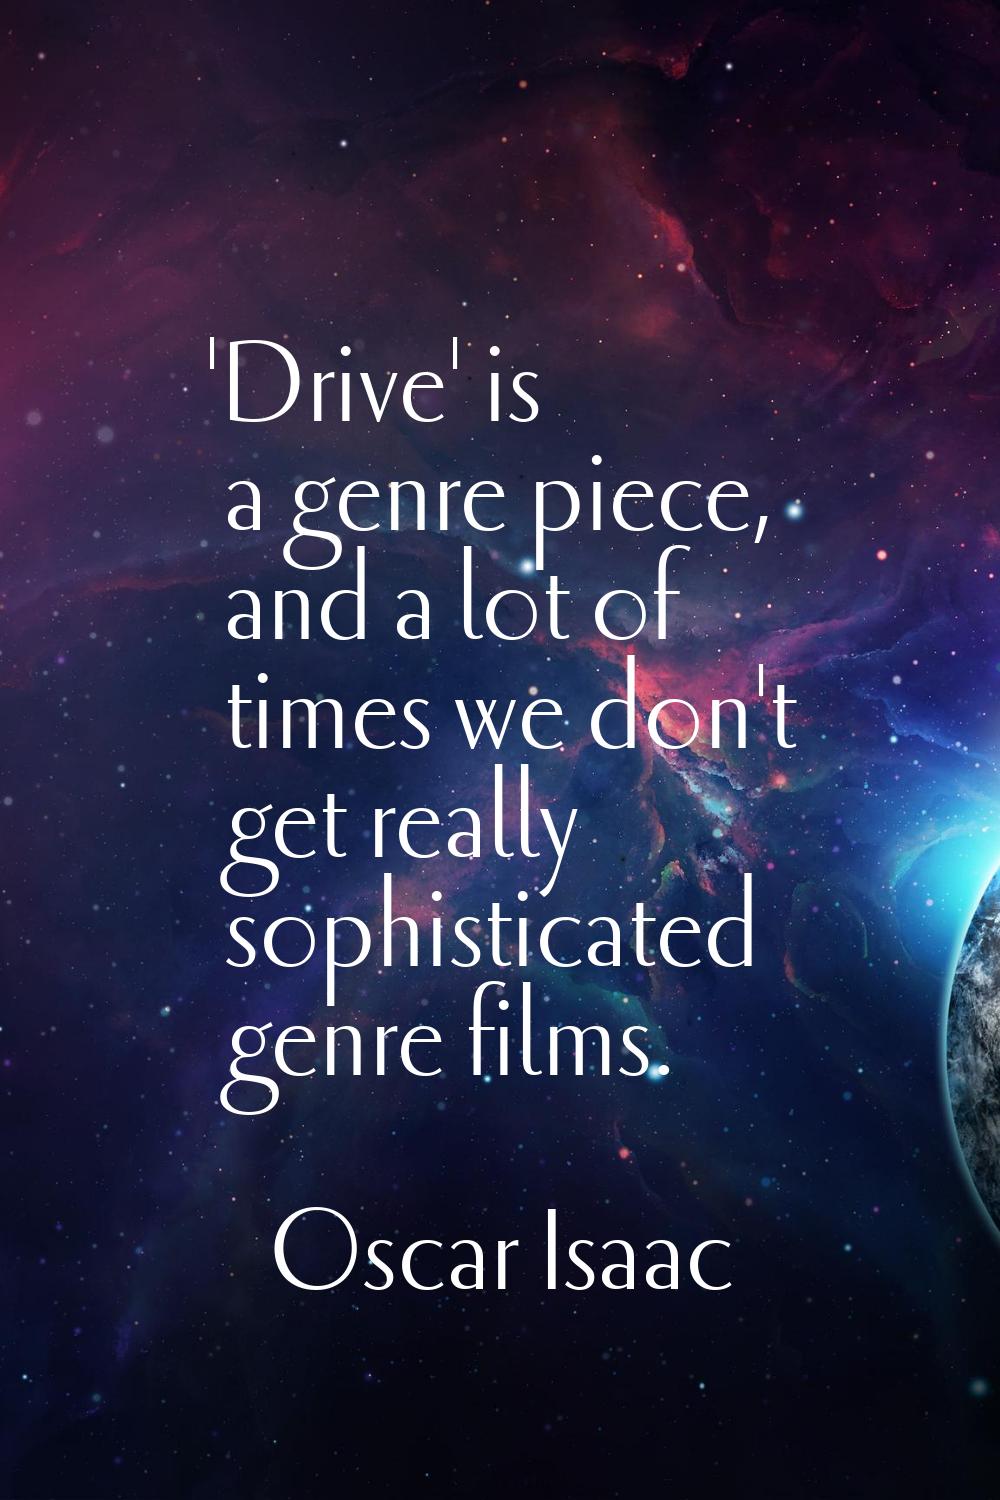 'Drive' is a genre piece, and a lot of times we don't get really sophisticated genre films.